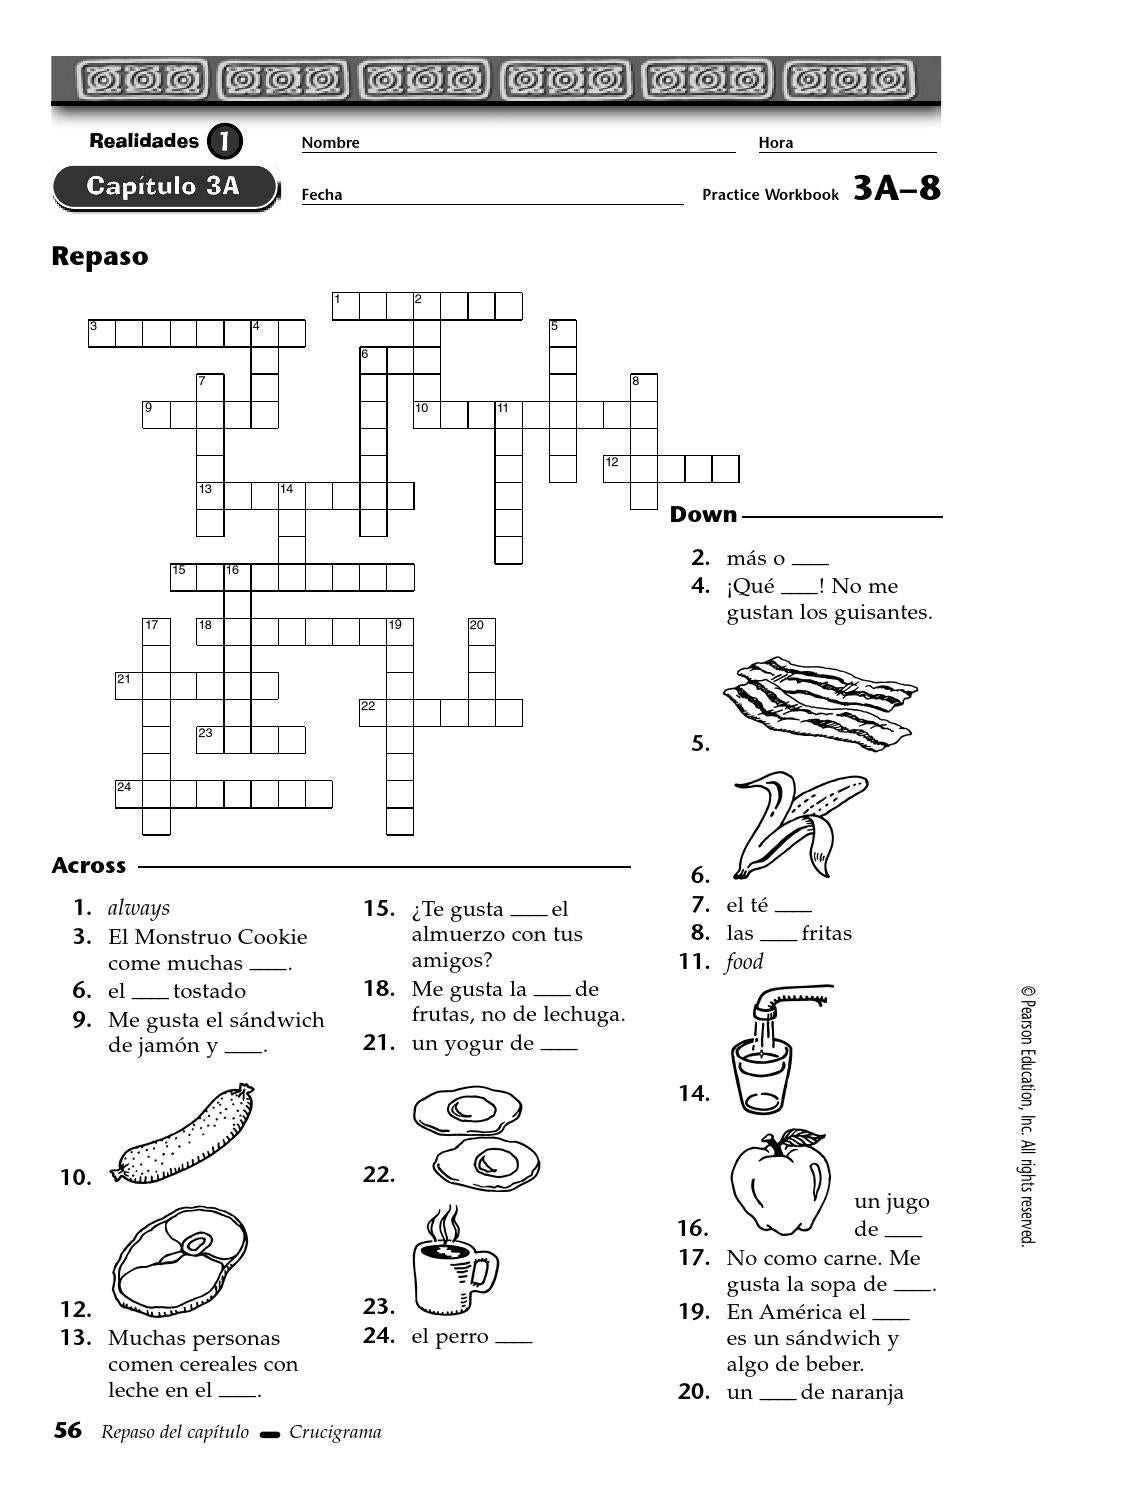 Realidades 1 capitulo 7b crossword answers